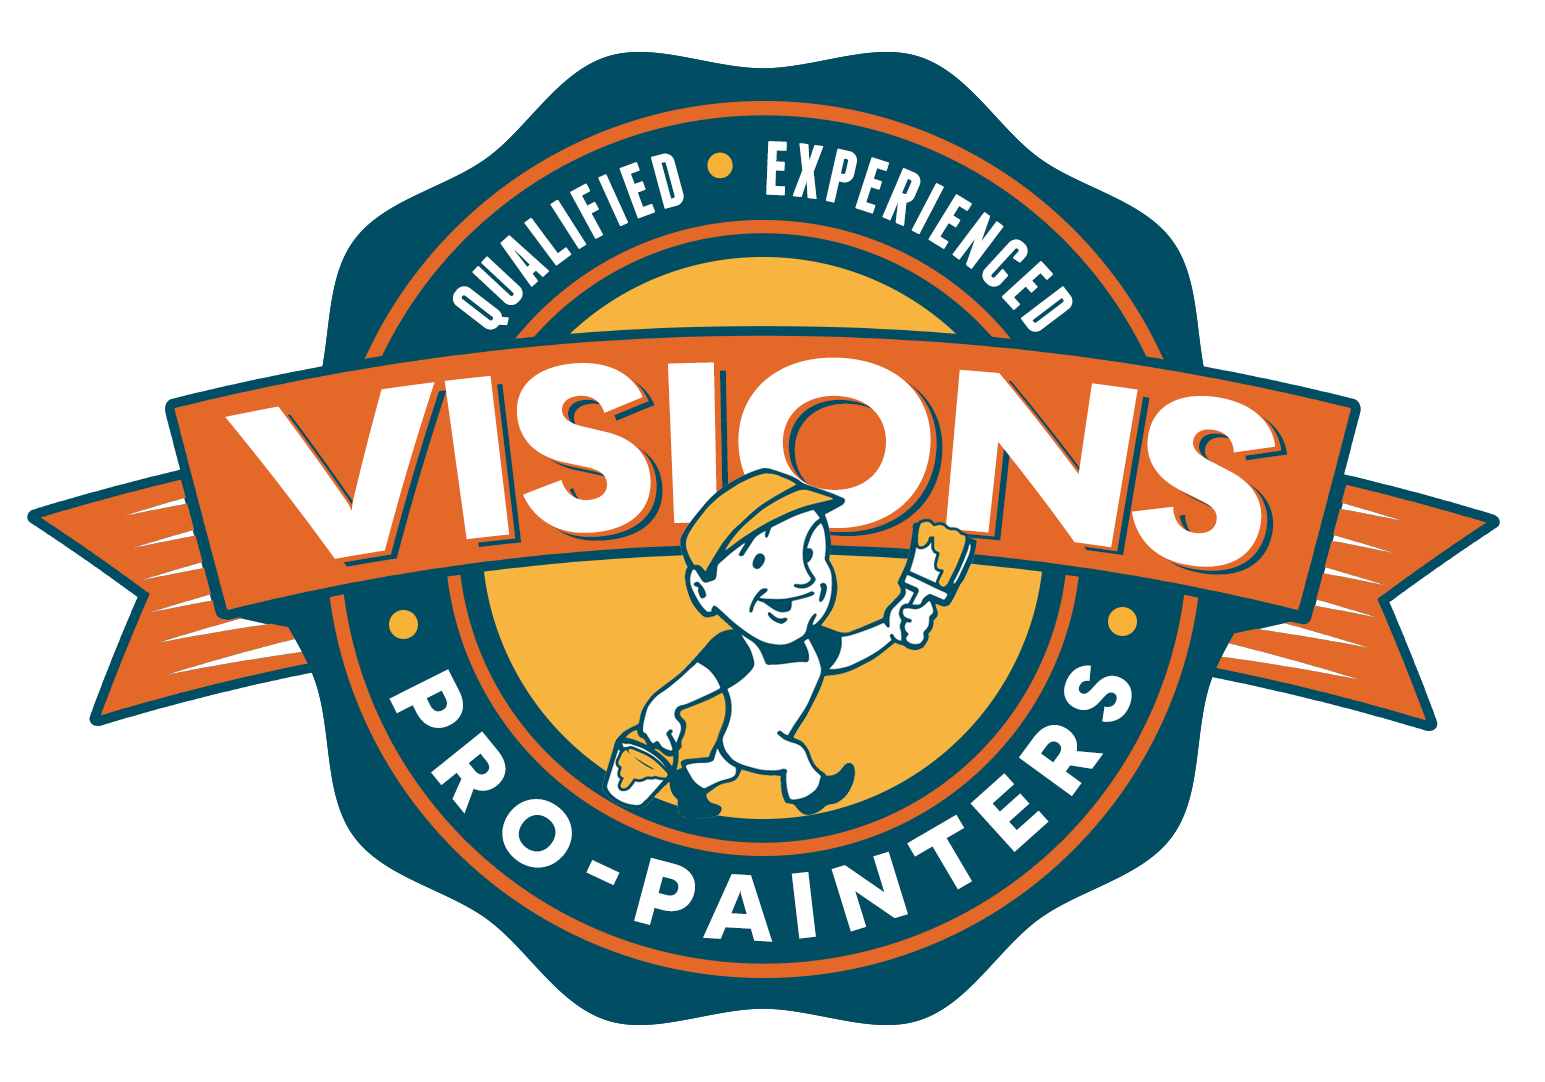 Visionspro Painters